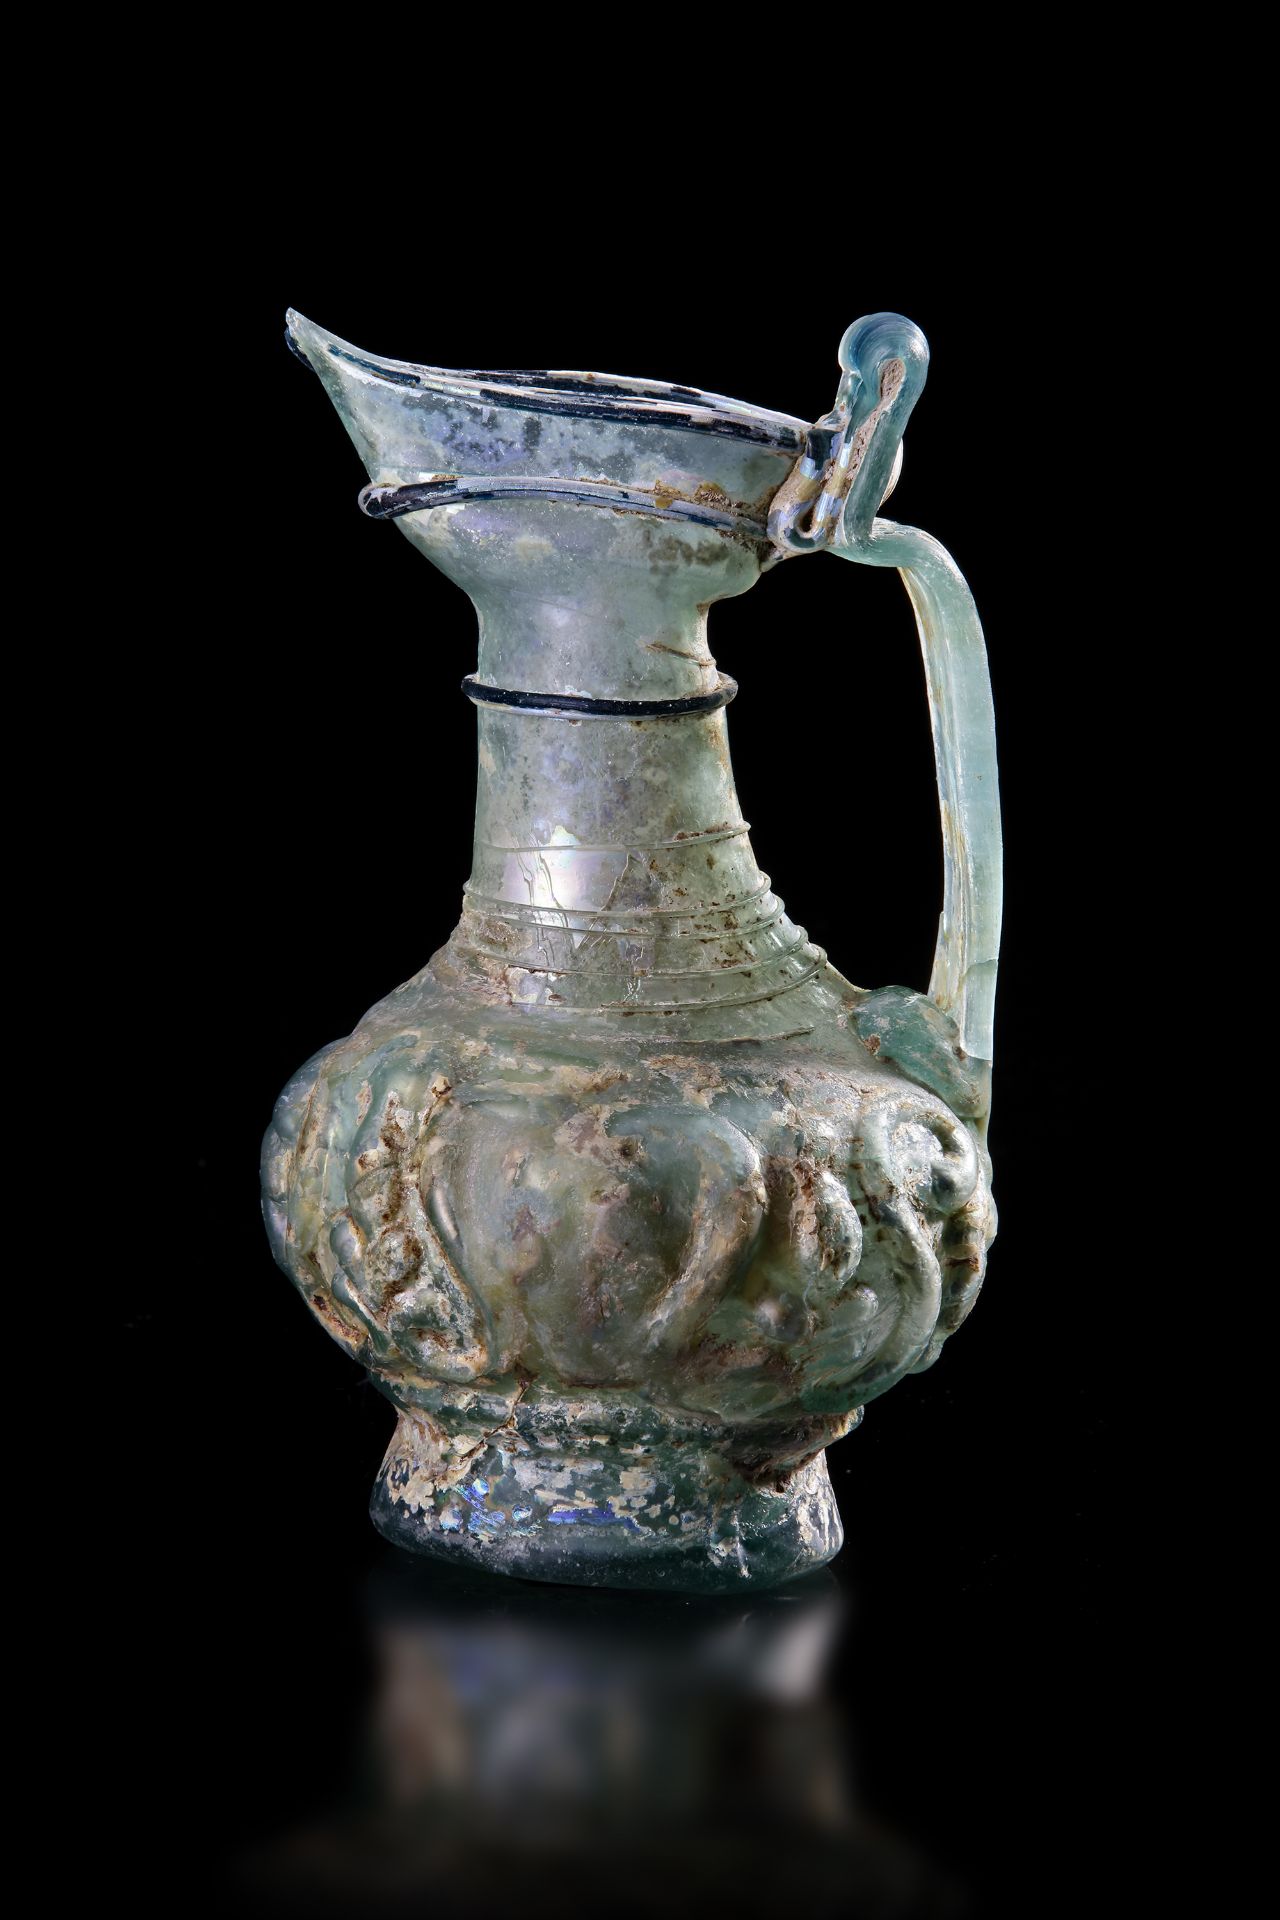 A GLASS EWER WITH SPOUT, PERSIA, 10TH-12TH CENTURY - Image 11 of 12